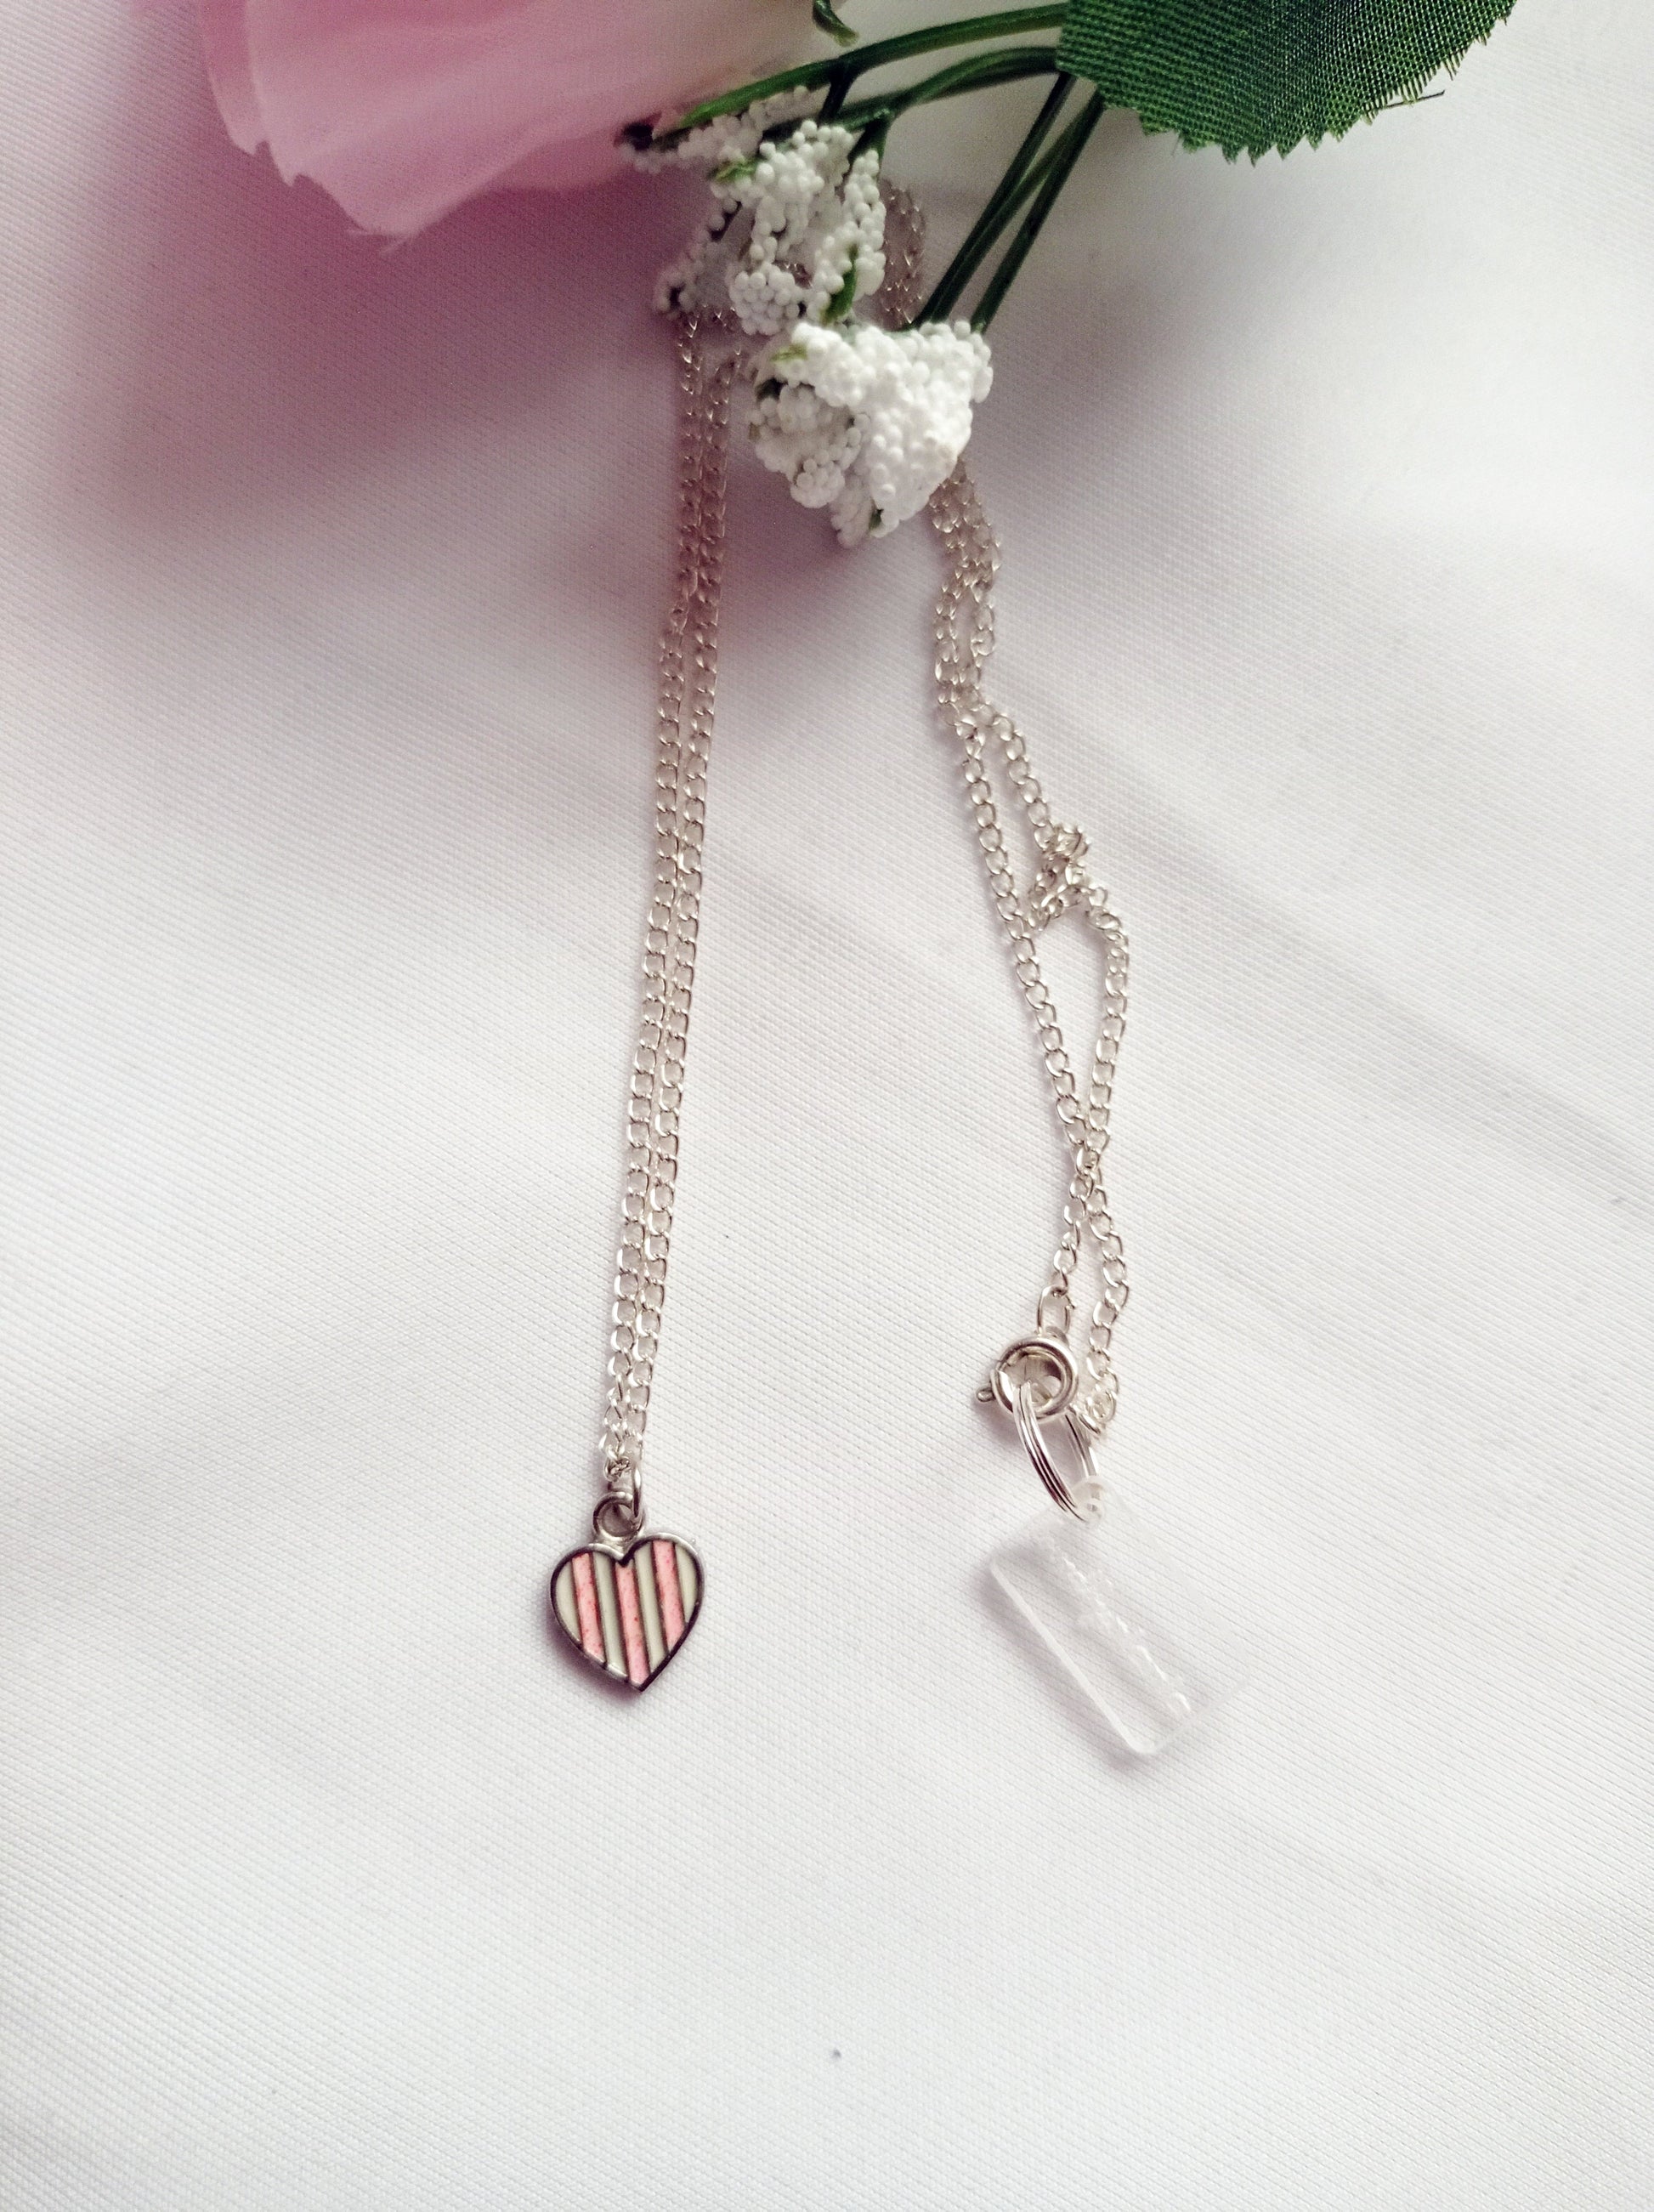 Candy Striped Heart Necklace, Playing Cards inspired Queen of Hearts | by lovedbynlanla-4